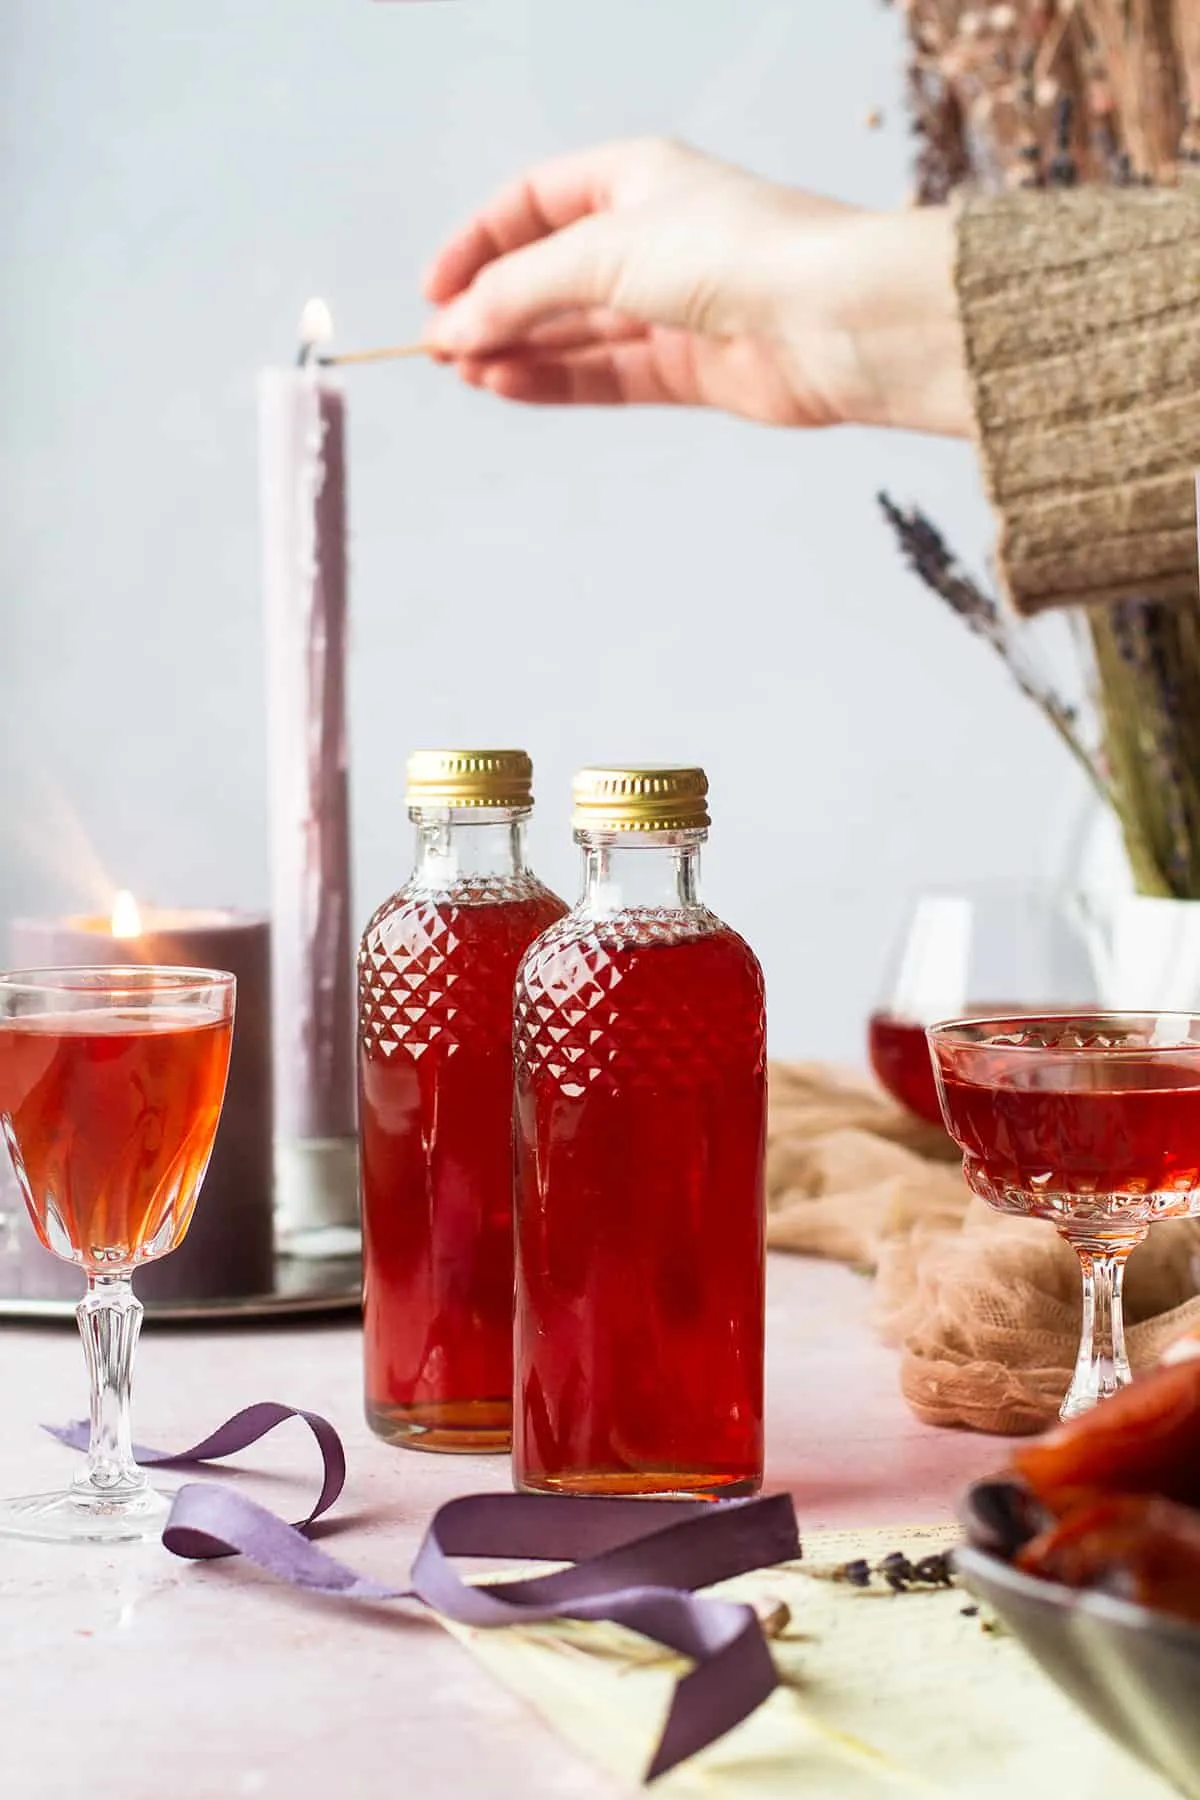 Two bottles of plum liqueur, hand lighting a candle in the background.